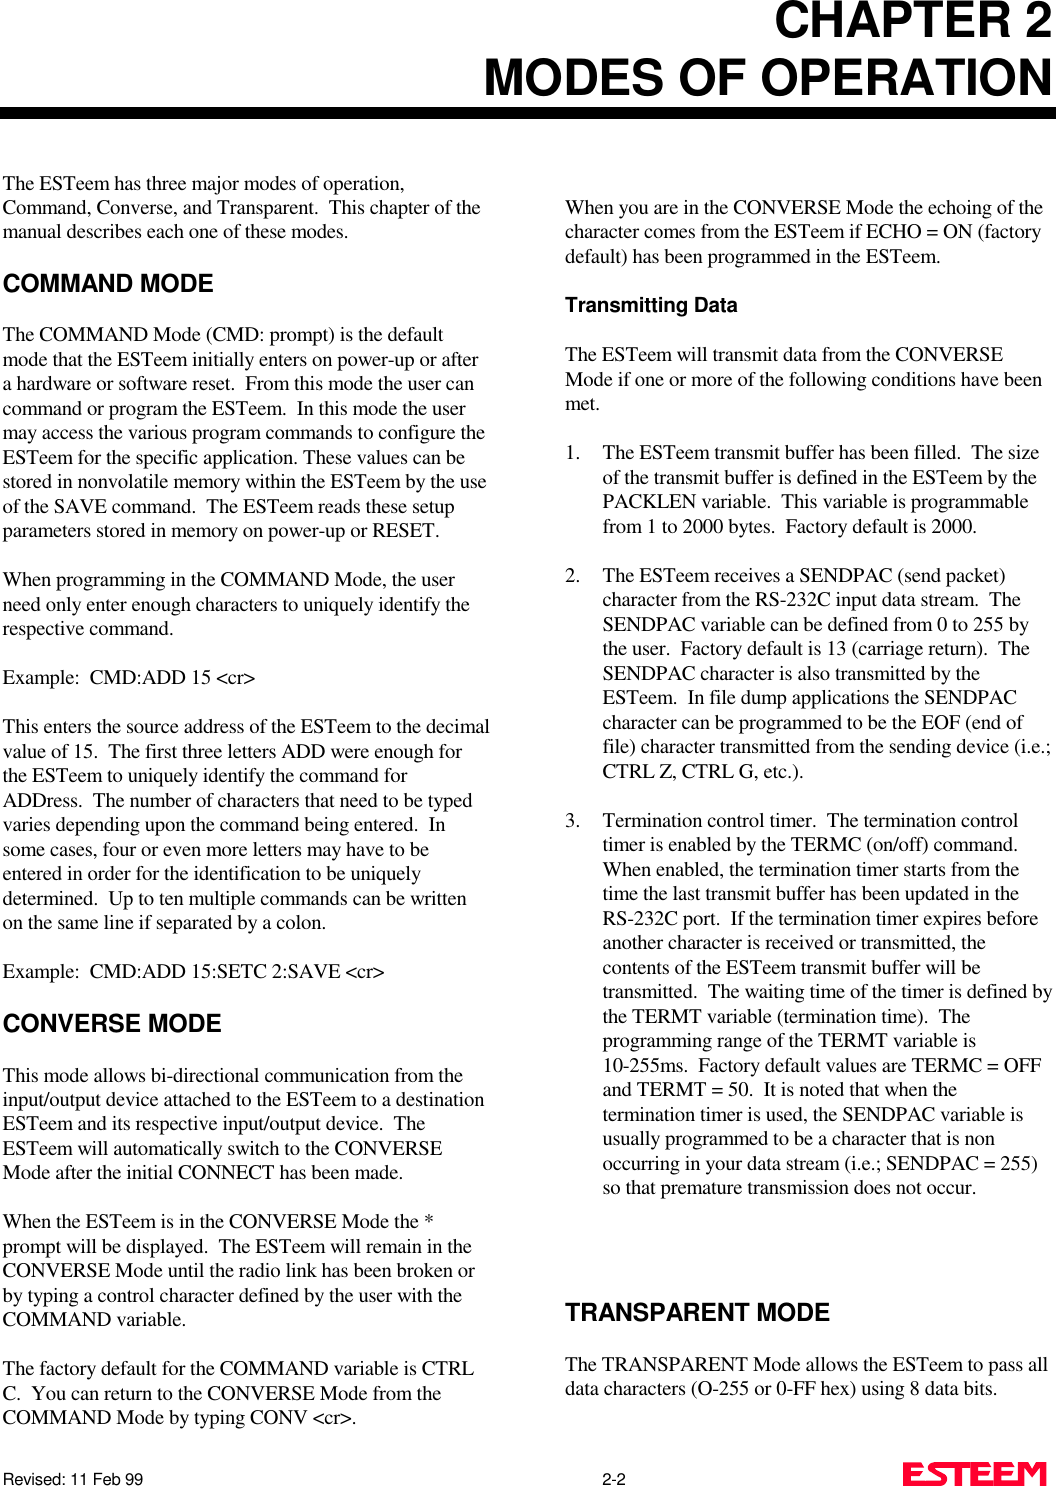 CHAPTER 2MODES OF OPERATIONRevised: 11 Feb 99                                                                                                      2-2The ESTeem has three major modes of operation,Command, Converse, and Transparent.  This chapter of themanual describes each one of these modes.COMMAND MODEThe COMMAND Mode (CMD: prompt) is the defaultmode that the ESTeem initially enters on power-up or aftera hardware or software reset.  From this mode the user cancommand or program the ESTeem.  In this mode the usermay access the various program commands to configure theESTeem for the specific application. These values can bestored in nonvolatile memory within the ESTeem by the useof the SAVE command.  The ESTeem reads these setupparameters stored in memory on power-up or RESET. When programming in the COMMAND Mode, the userneed only enter enough characters to uniquely identify therespective command.Example:  CMD:ADD 15 &lt;cr&gt;This enters the source address of the ESTeem to the decimalvalue of 15.  The first three letters ADD were enough forthe ESTeem to uniquely identify the command forADDress.  The number of characters that need to be typedvaries depending upon the command being entered.  Insome cases, four or even more letters may have to beentered in order for the identification to be uniquelydetermined.  Up to ten multiple commands can be writtenon the same line if separated by a colon.Example:  CMD:ADD 15:SETC 2:SAVE &lt;cr&gt;CONVERSE MODEThis mode allows bi-directional communication from theinput/output device attached to the ESTeem to a destinationESTeem and its respective input/output device.  TheESTeem will automatically switch to the CONVERSEMode after the initial CONNECT has been made.When the ESTeem is in the CONVERSE Mode the *prompt will be displayed.  The ESTeem will remain in theCONVERSE Mode until the radio link has been broken orby typing a control character defined by the user with theCOMMAND variable.The factory default for the COMMAND variable is CTRLC.  You can return to the CONVERSE Mode from theCOMMAND Mode by typing CONV &lt;cr&gt;.When you are in the CONVERSE Mode the echoing of thecharacter comes from the ESTeem if ECHO = ON (factorydefault) has been programmed in the ESTeem.Transmitting DataThe ESTeem will transmit data from the CONVERSEMode if one or more of the following conditions have beenmet.1. The ESTeem transmit buffer has been filled.  The sizeof the transmit buffer is defined in the ESTeem by thePACKLEN variable.  This variable is programmablefrom 1 to 2000 bytes.  Factory default is 2000.2. The ESTeem receives a SENDPAC (send packet)character from the RS-232C input data stream.  TheSENDPAC variable can be defined from 0 to 255 bythe user.  Factory default is 13 (carriage return).  TheSENDPAC character is also transmitted by theESTeem.  In file dump applications the SENDPACcharacter can be programmed to be the EOF (end offile) character transmitted from the sending device (i.e.;CTRL Z, CTRL G, etc.).3. Termination control timer.  The termination controltimer is enabled by the TERMC (on/off) command. When enabled, the termination timer starts from thetime the last transmit buffer has been updated in theRS-232C port.  If the termination timer expires beforeanother character is received or transmitted, thecontents of the ESTeem transmit buffer will betransmitted.  The waiting time of the timer is defined bythe TERMT variable (termination time).  Theprogramming range of the TERMT variable is10-255ms.  Factory default values are TERMC = OFFand TERMT = 50.  It is noted that when thetermination timer is used, the SENDPAC variable isusually programmed to be a character that is nonoccurring in your data stream (i.e.; SENDPAC = 255)so that premature transmission does not occur.TRANSPARENT MODEThe TRANSPARENT Mode allows the ESTeem to pass alldata characters (O-255 or 0-FF hex) using 8 data bits. 